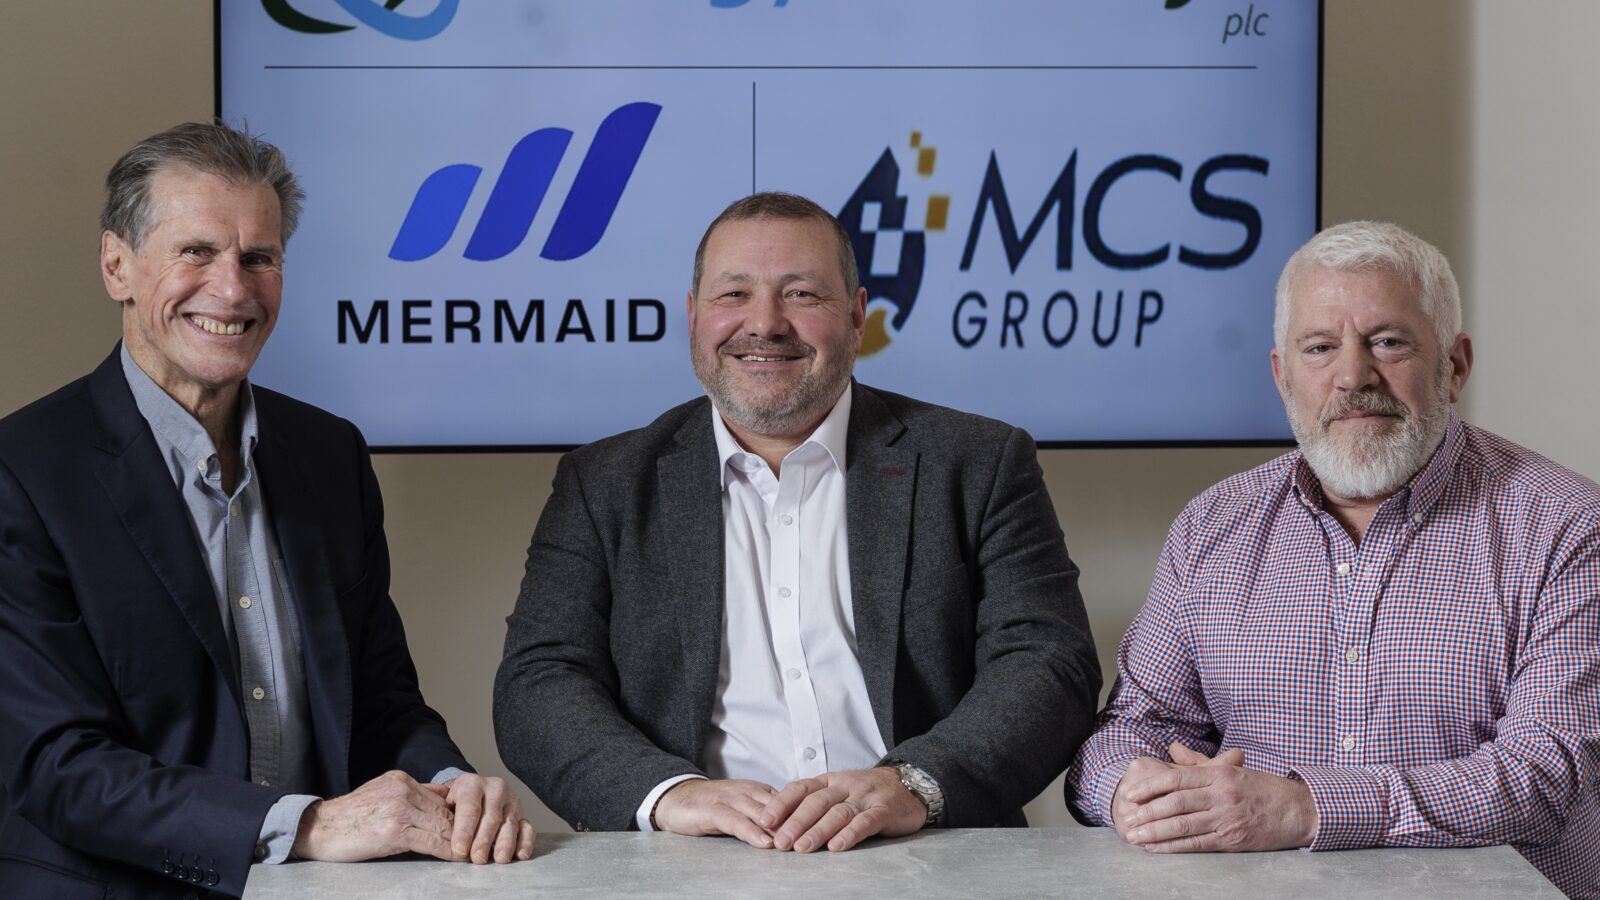 Mermaid and MCS Group sign MoU with EnergyPathways to provide FEED services for Marram field